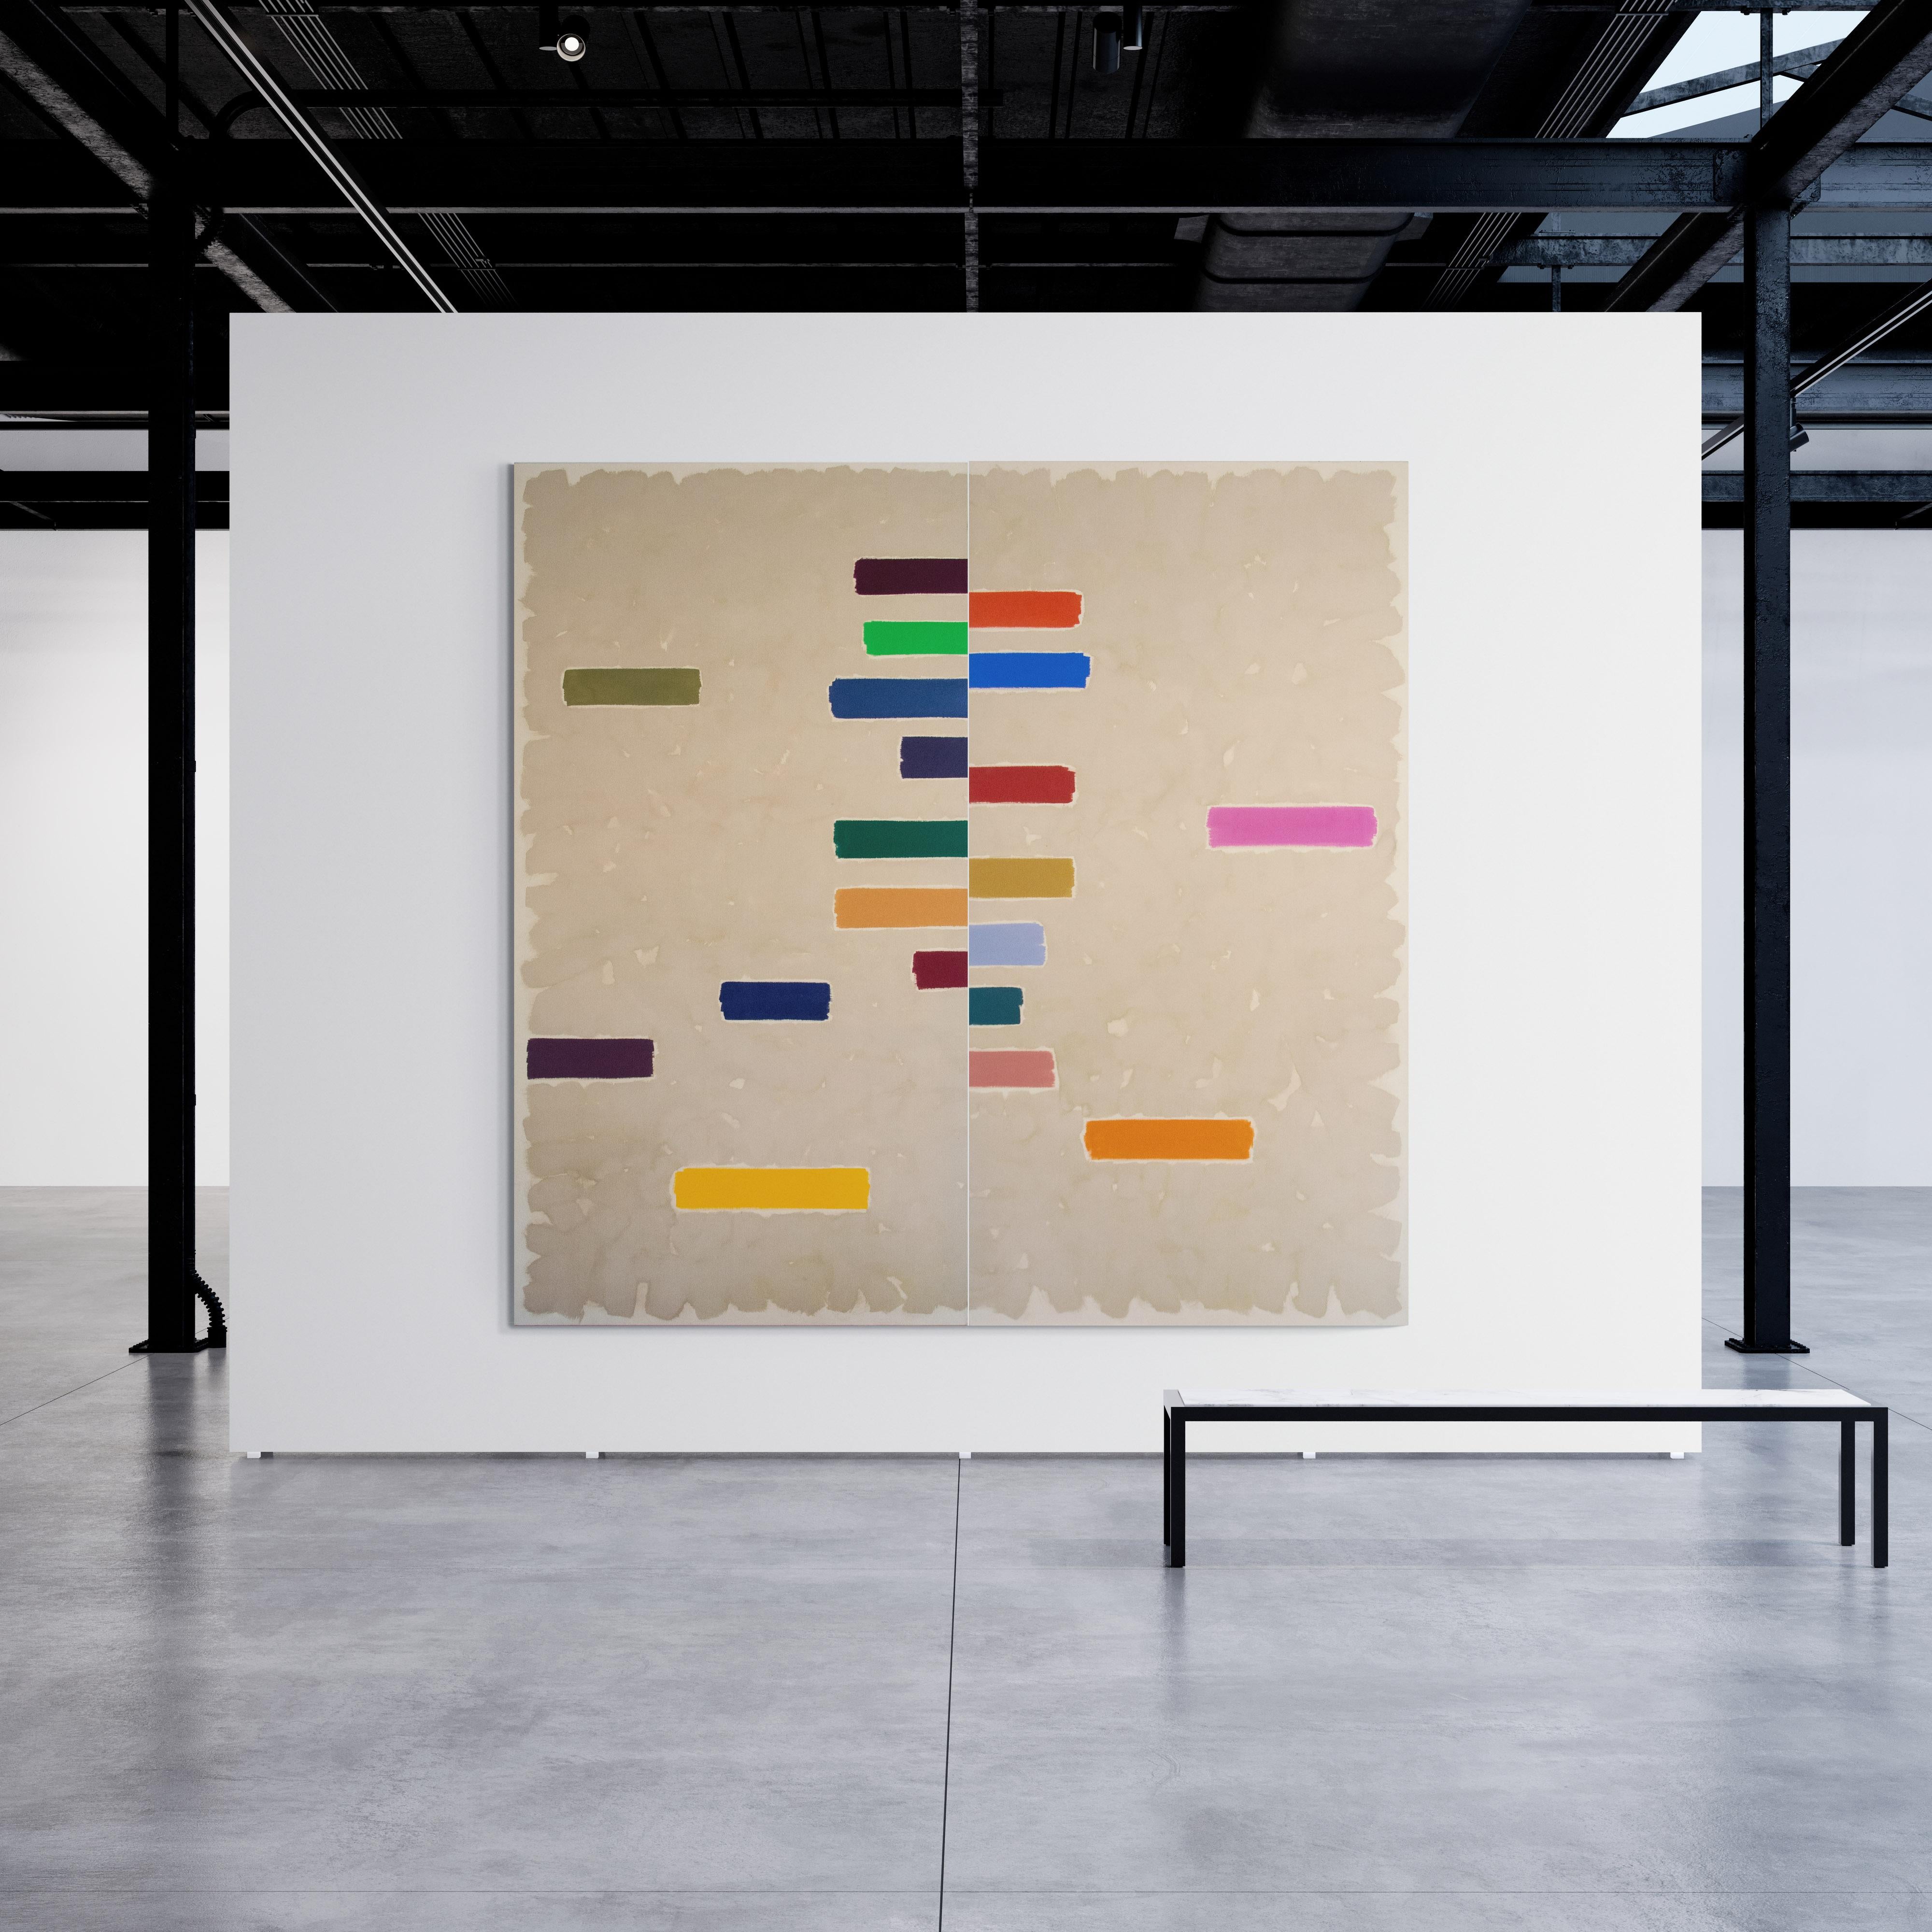 Horizontal bars of blue, maroon, cherry red, pink, lemon yellow, burnt orange and green communicate on a soaked sand-coloured ground in the two panels that form this 9-foot square acrylic diptych painting on canvas. The rhythm of the spaces between